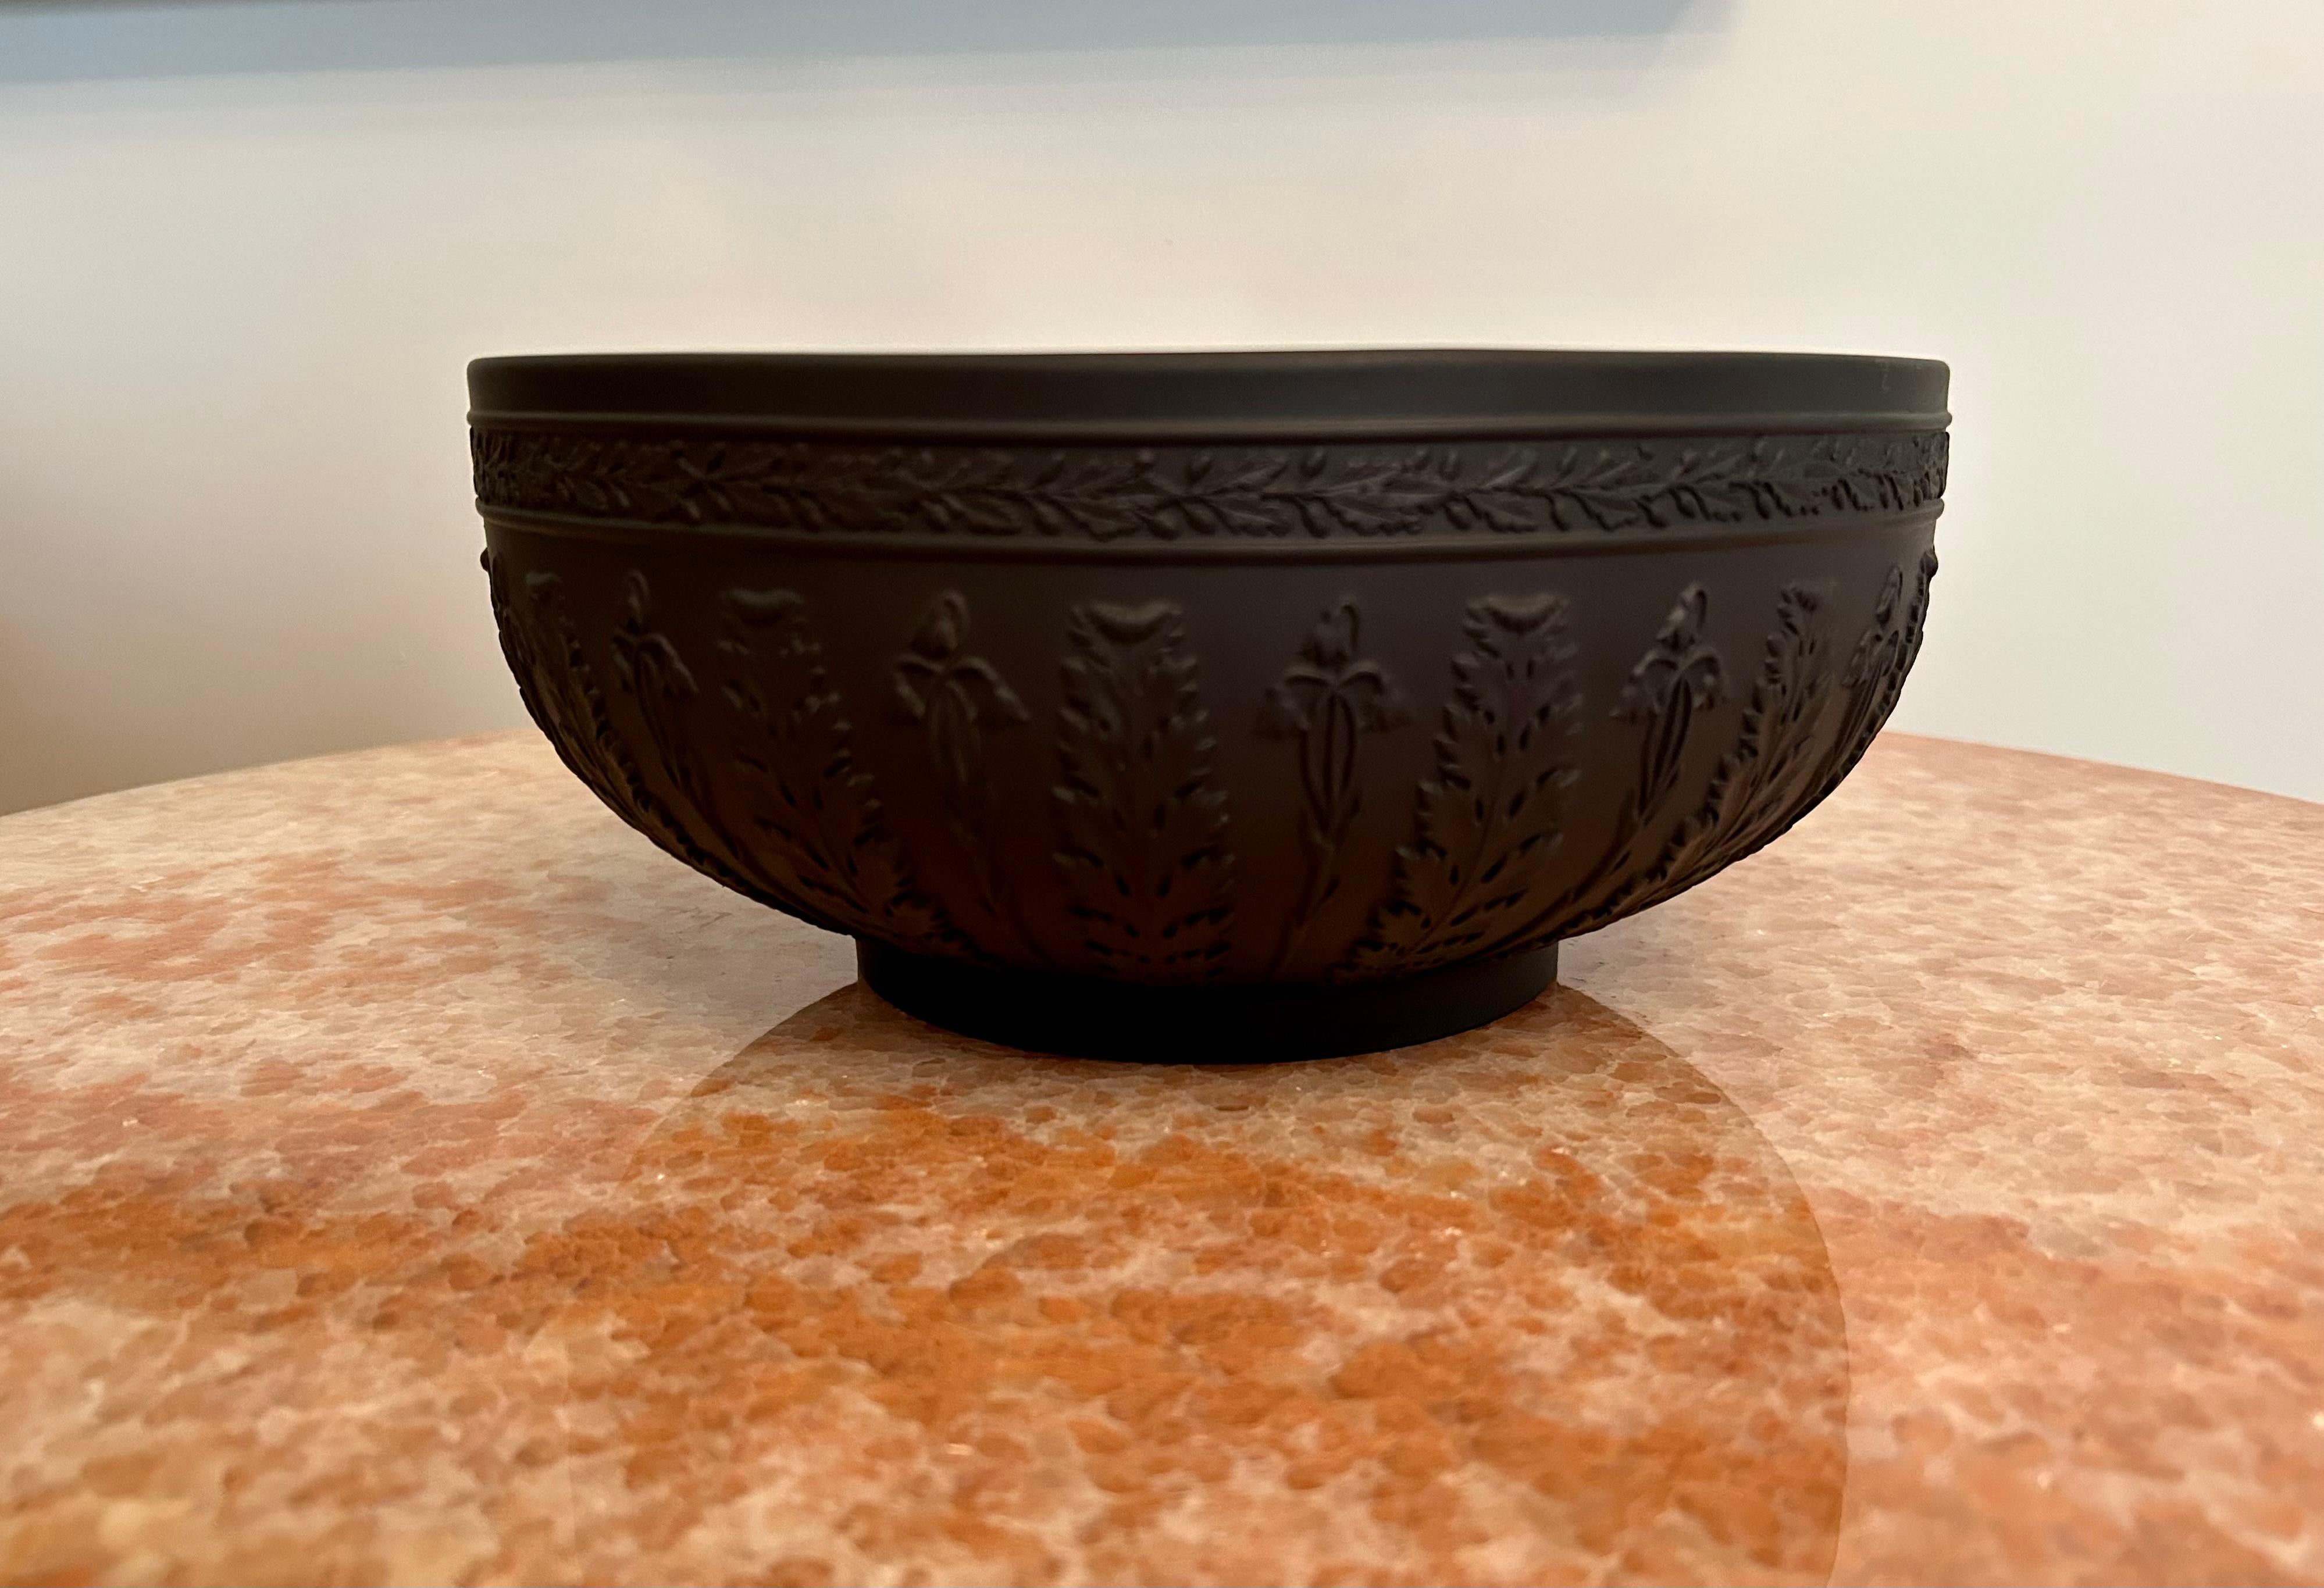 A beautiful Wedgwood basalt bowl in the acanthus pattern, dated 2012, in gold, on the base, and impressed WEDGWOOD MADE IN ENGLAND.
This bowl was made to commemorate the 250th Anniversary of Wedgwood. It comes in an original gift box which also